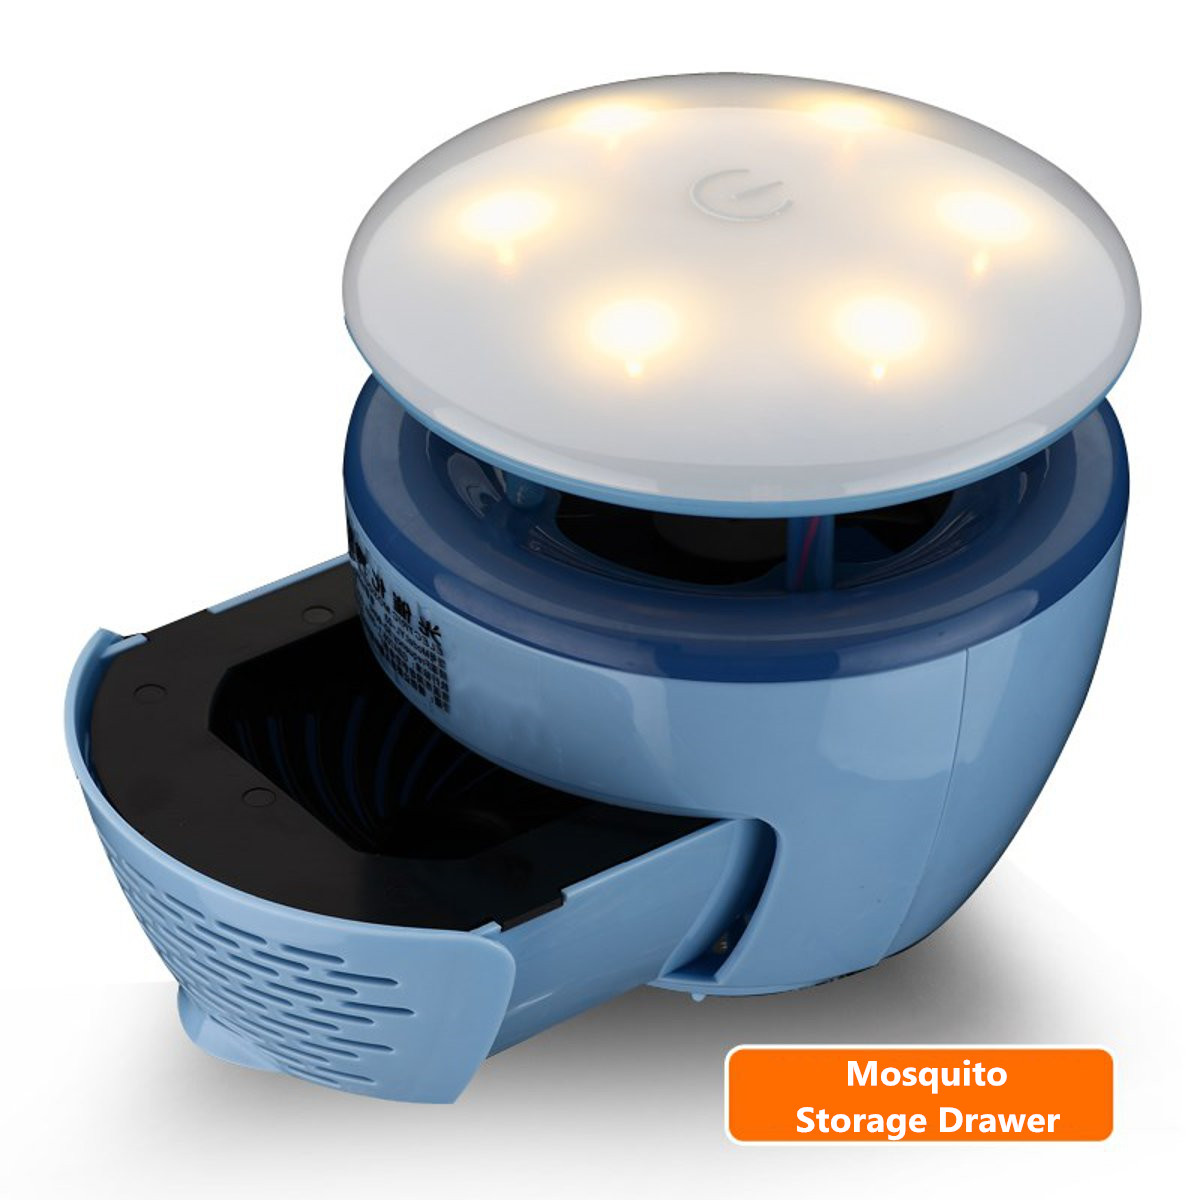 90-250V-6W-Electric-Mosquito-Dispeller-Zapper-Killer-LED-Physical-Fly-Insect-Bug-Trap-Lamp-Bulb-1323549-5